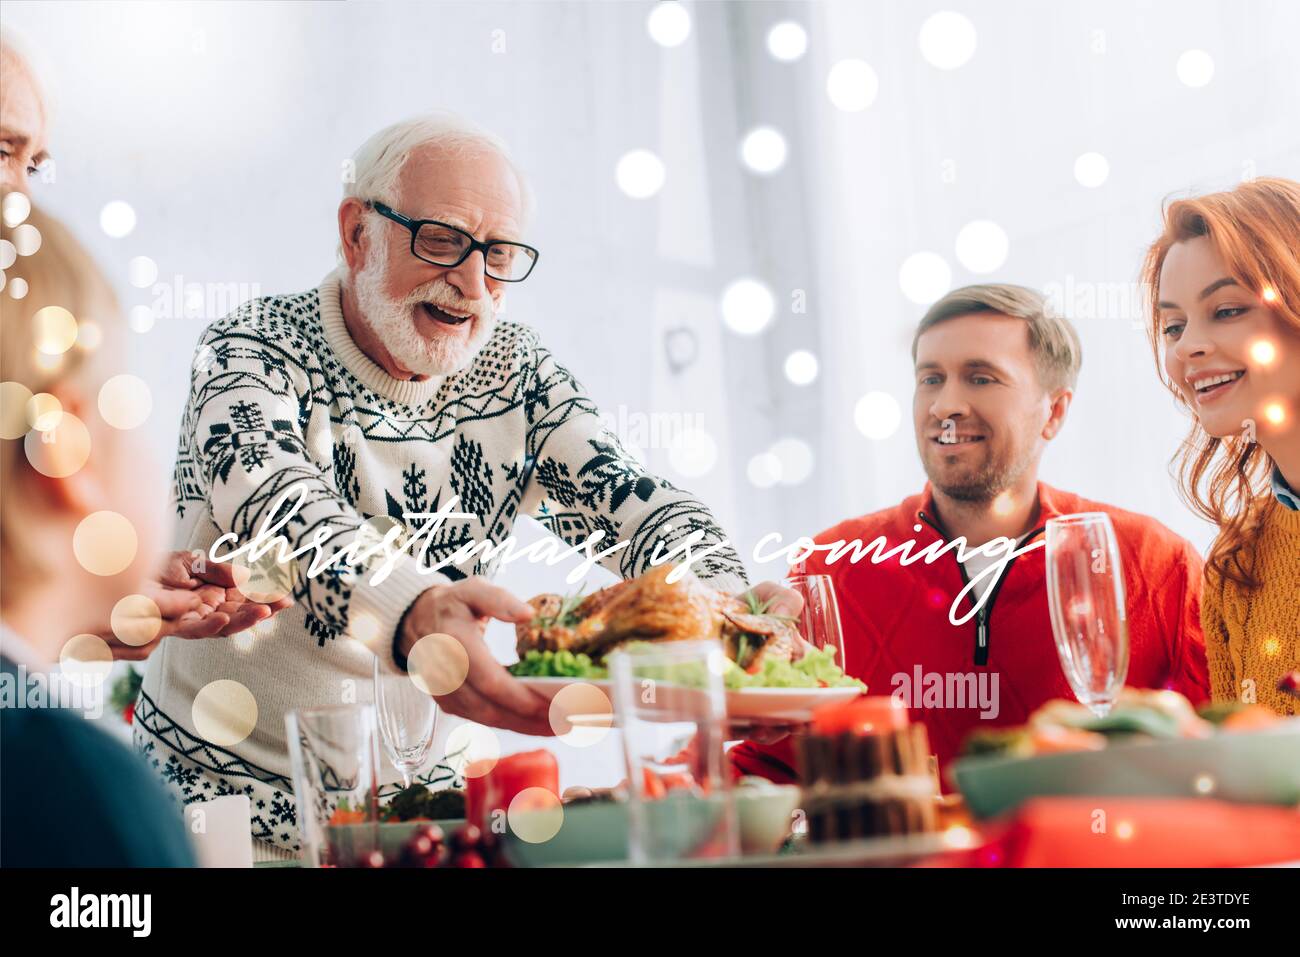 happy grandfather serving turkey on festive table near family, christmas is coming illustration Stock Photo